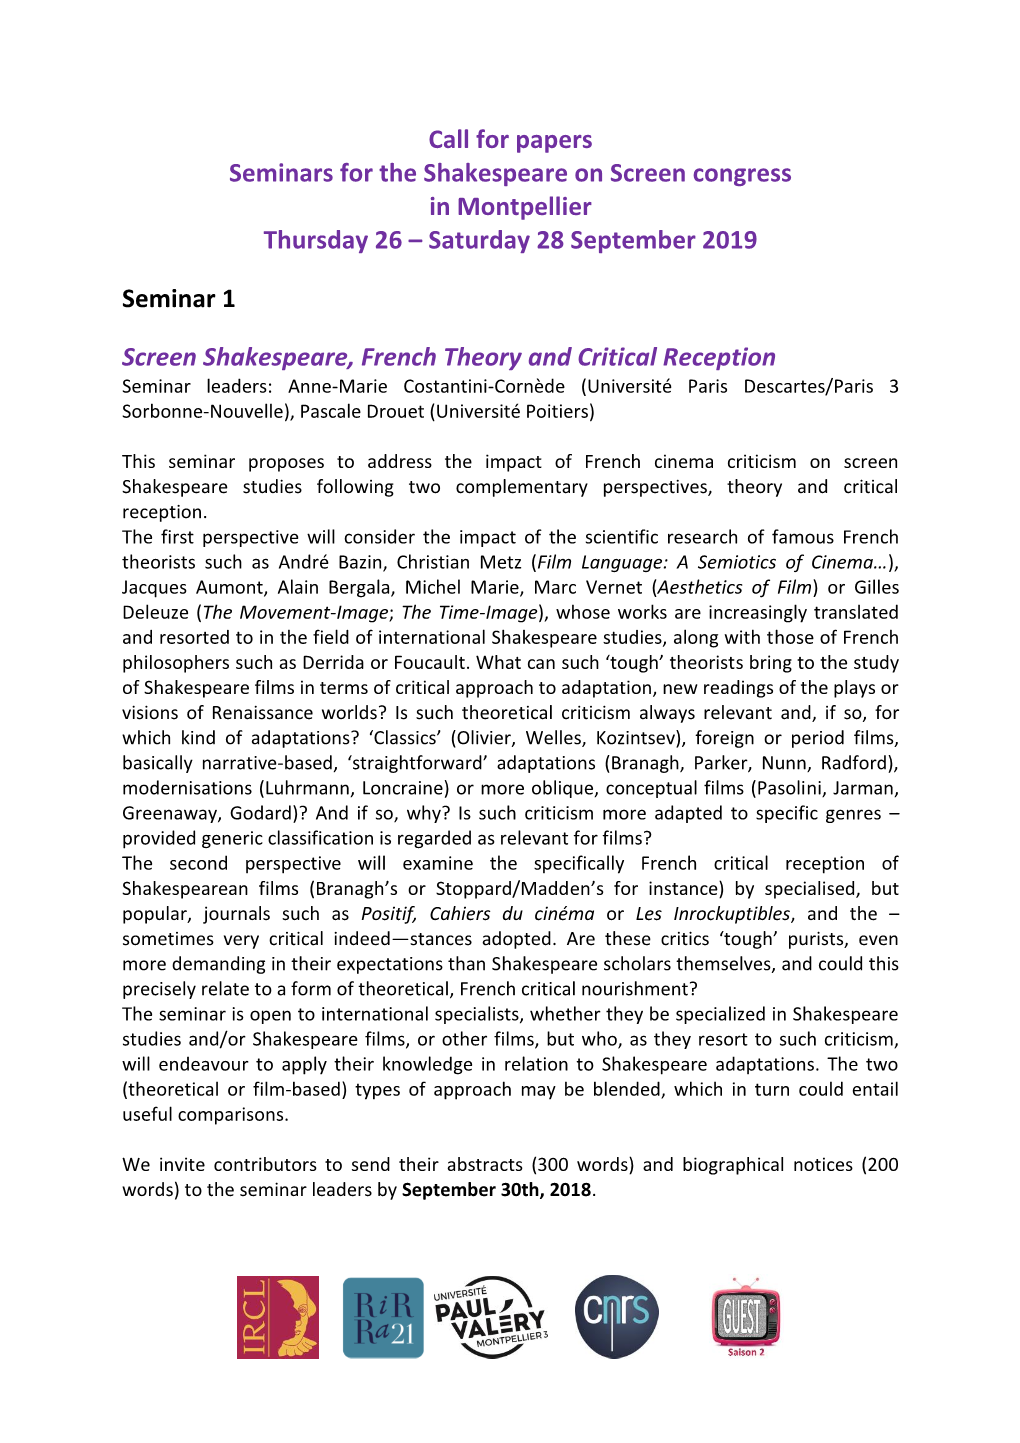 Call for Papers Seminars for the Shakespeare on Screen Congress in Montpellier Thursday 26 – Saturday 28 September 2019 Semin